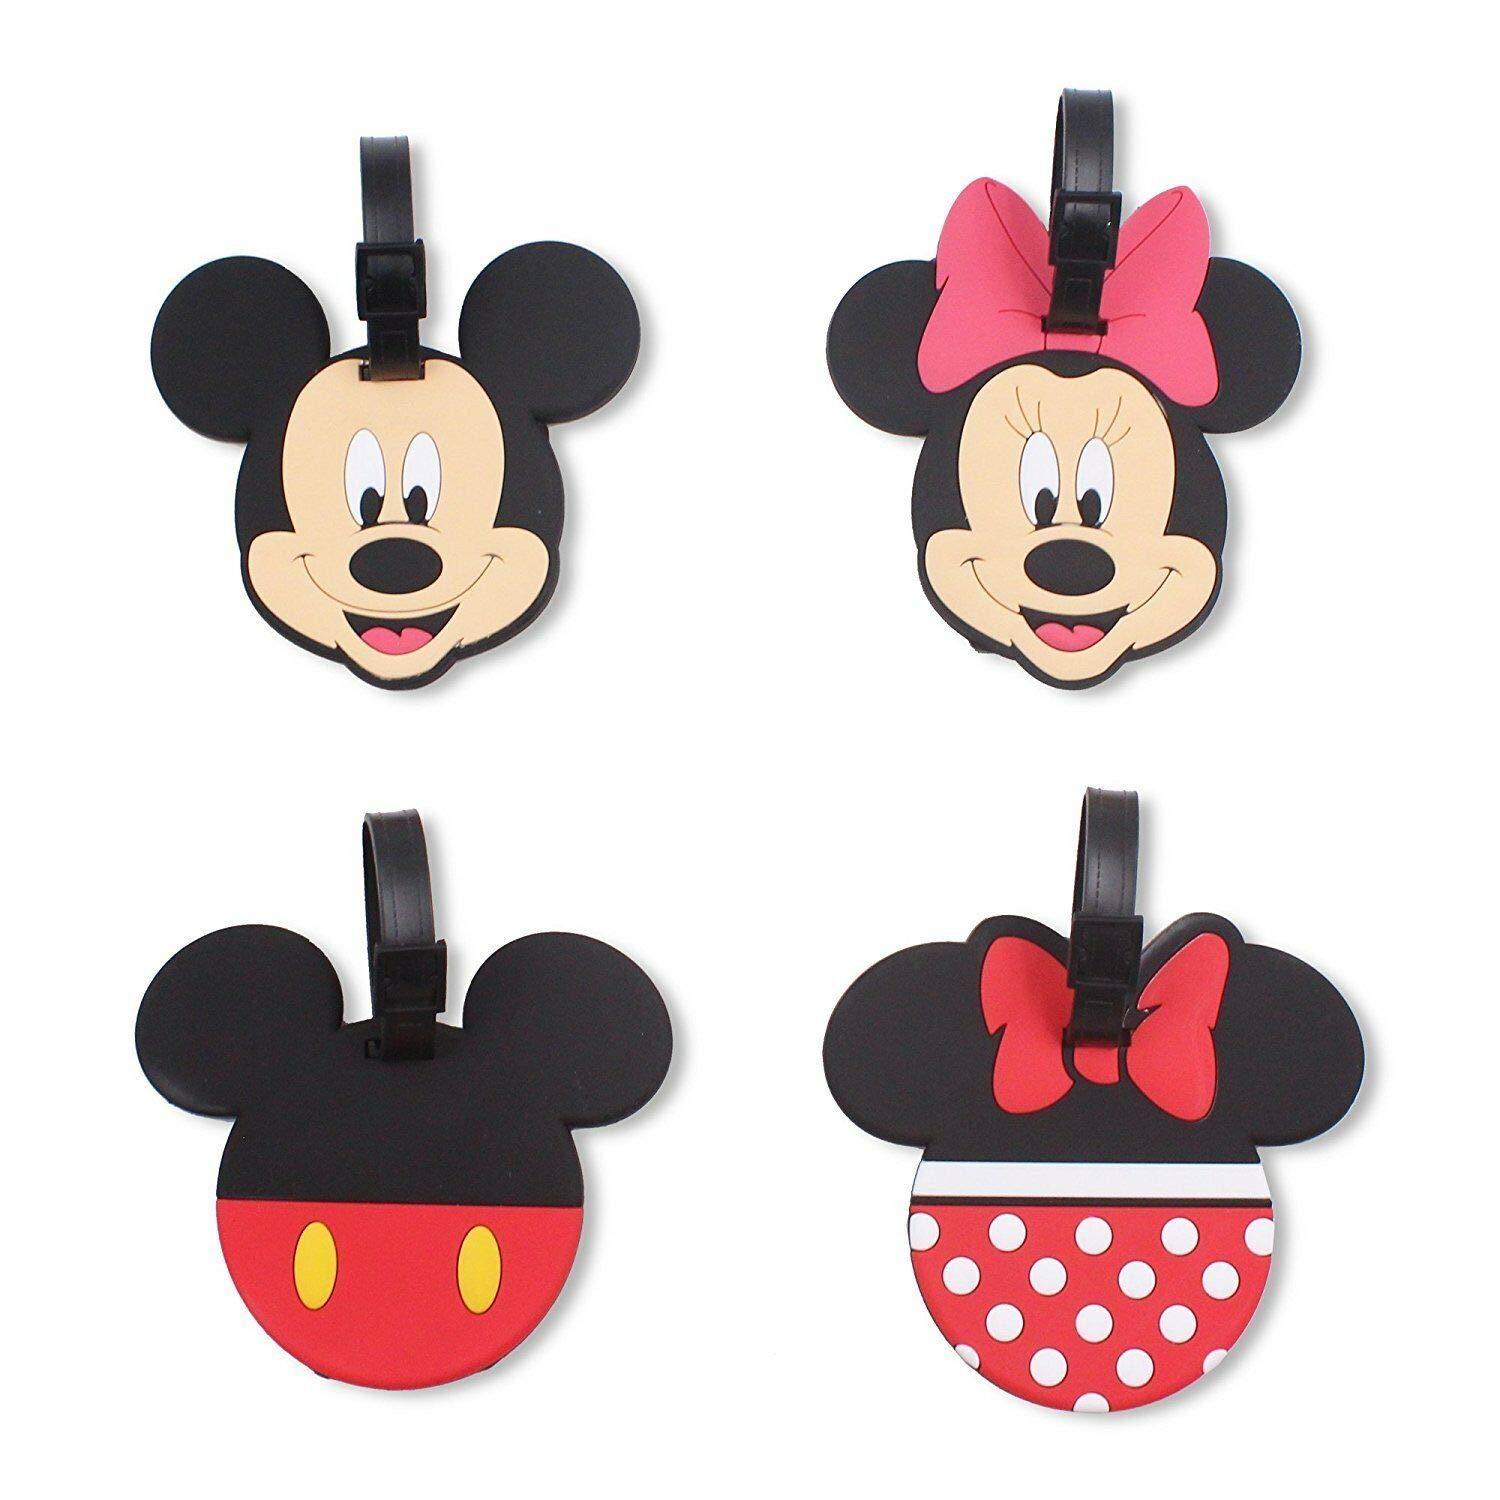 Hot Set of 4 – Super Cute Cartoon Silicone Travel Luggage ID Tag for Bags (Planes)